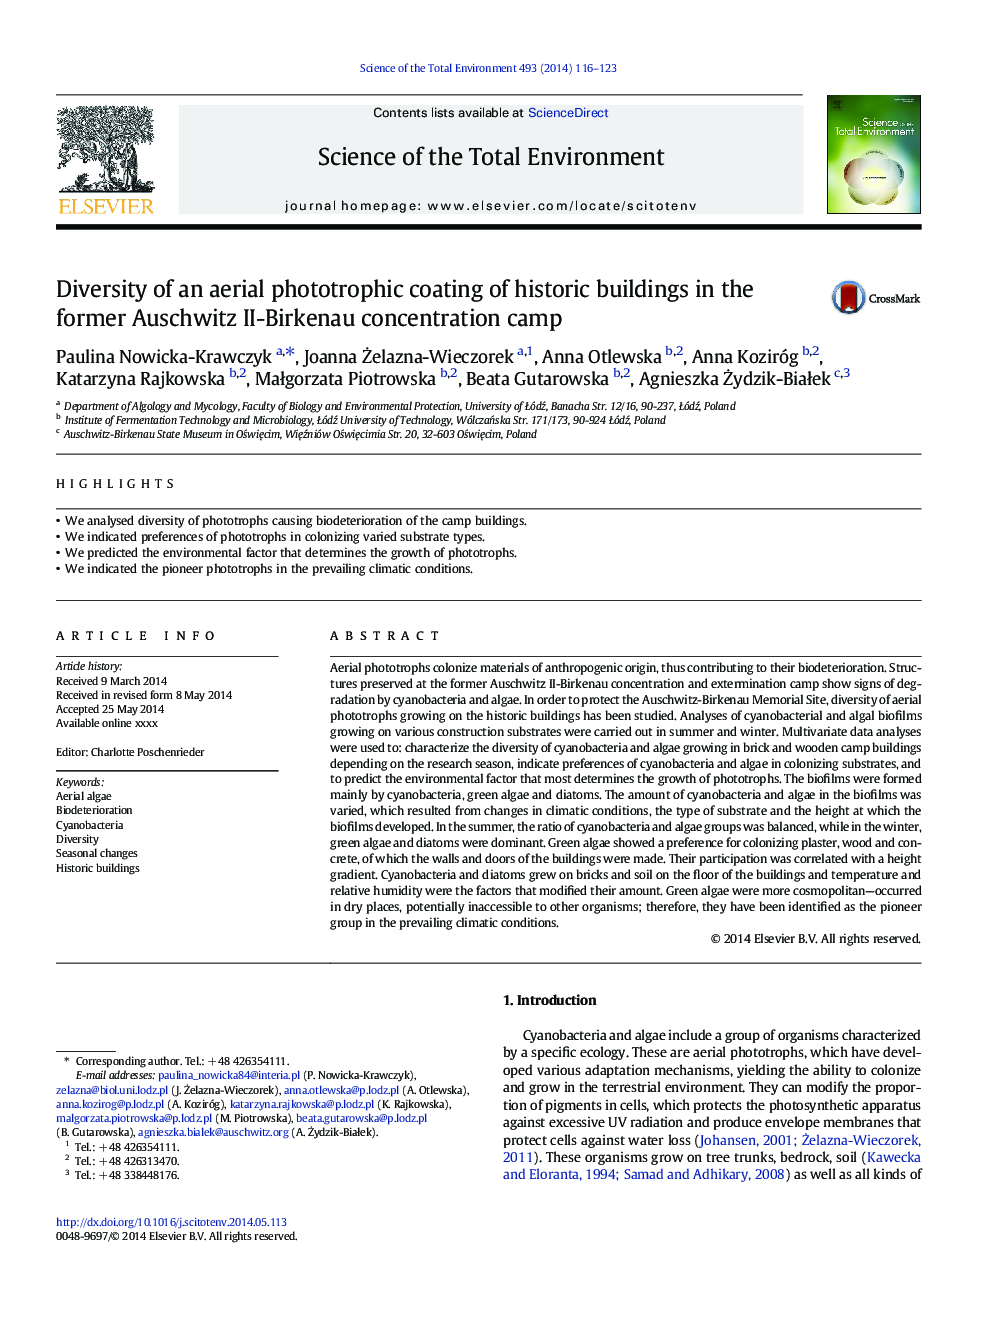 Diversity of an aerial phototrophic coating of historic buildings in the former Auschwitz II-Birkenau concentration camp